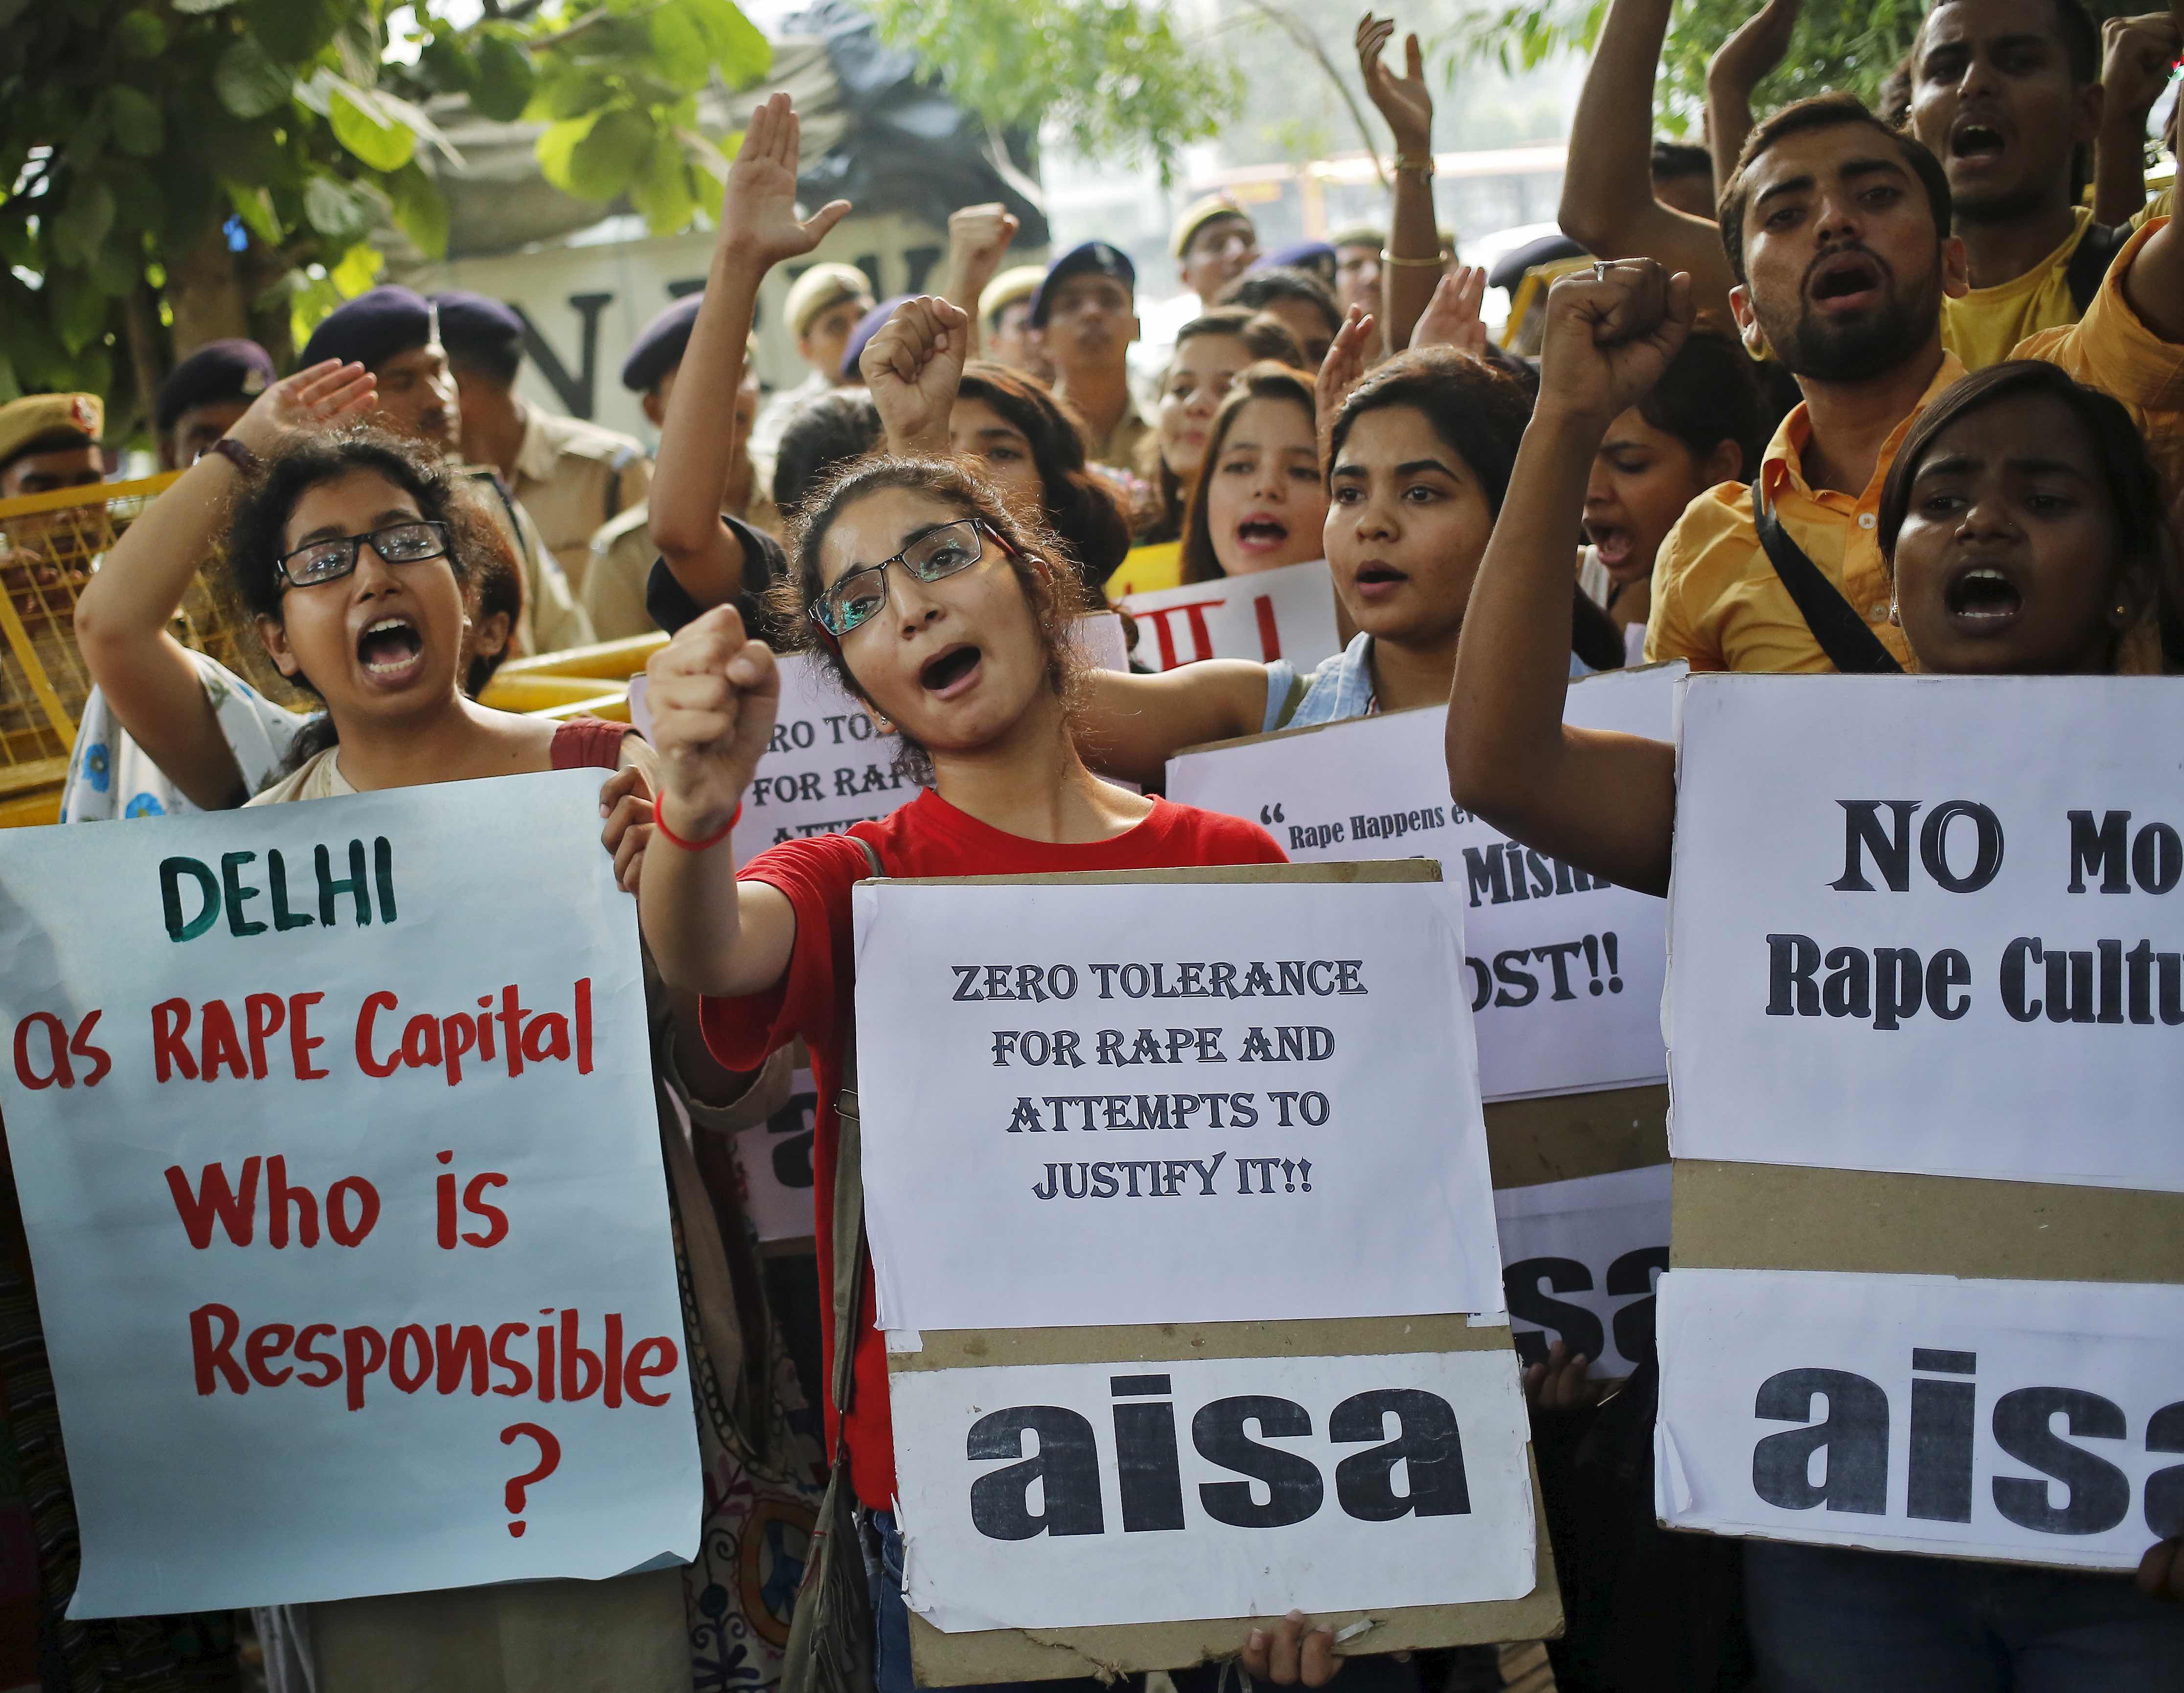 Members of All India Students Association (AISA) shout slogans as they hold placards during a protest outside police headquarters in New Delhi, India, October 18, 2015. Dozens of AISA members on Sunday held a protest against the recent rapes in the capital, the demonstrators said. REUTERS/Anindito Mukherjee - RTS4YAL